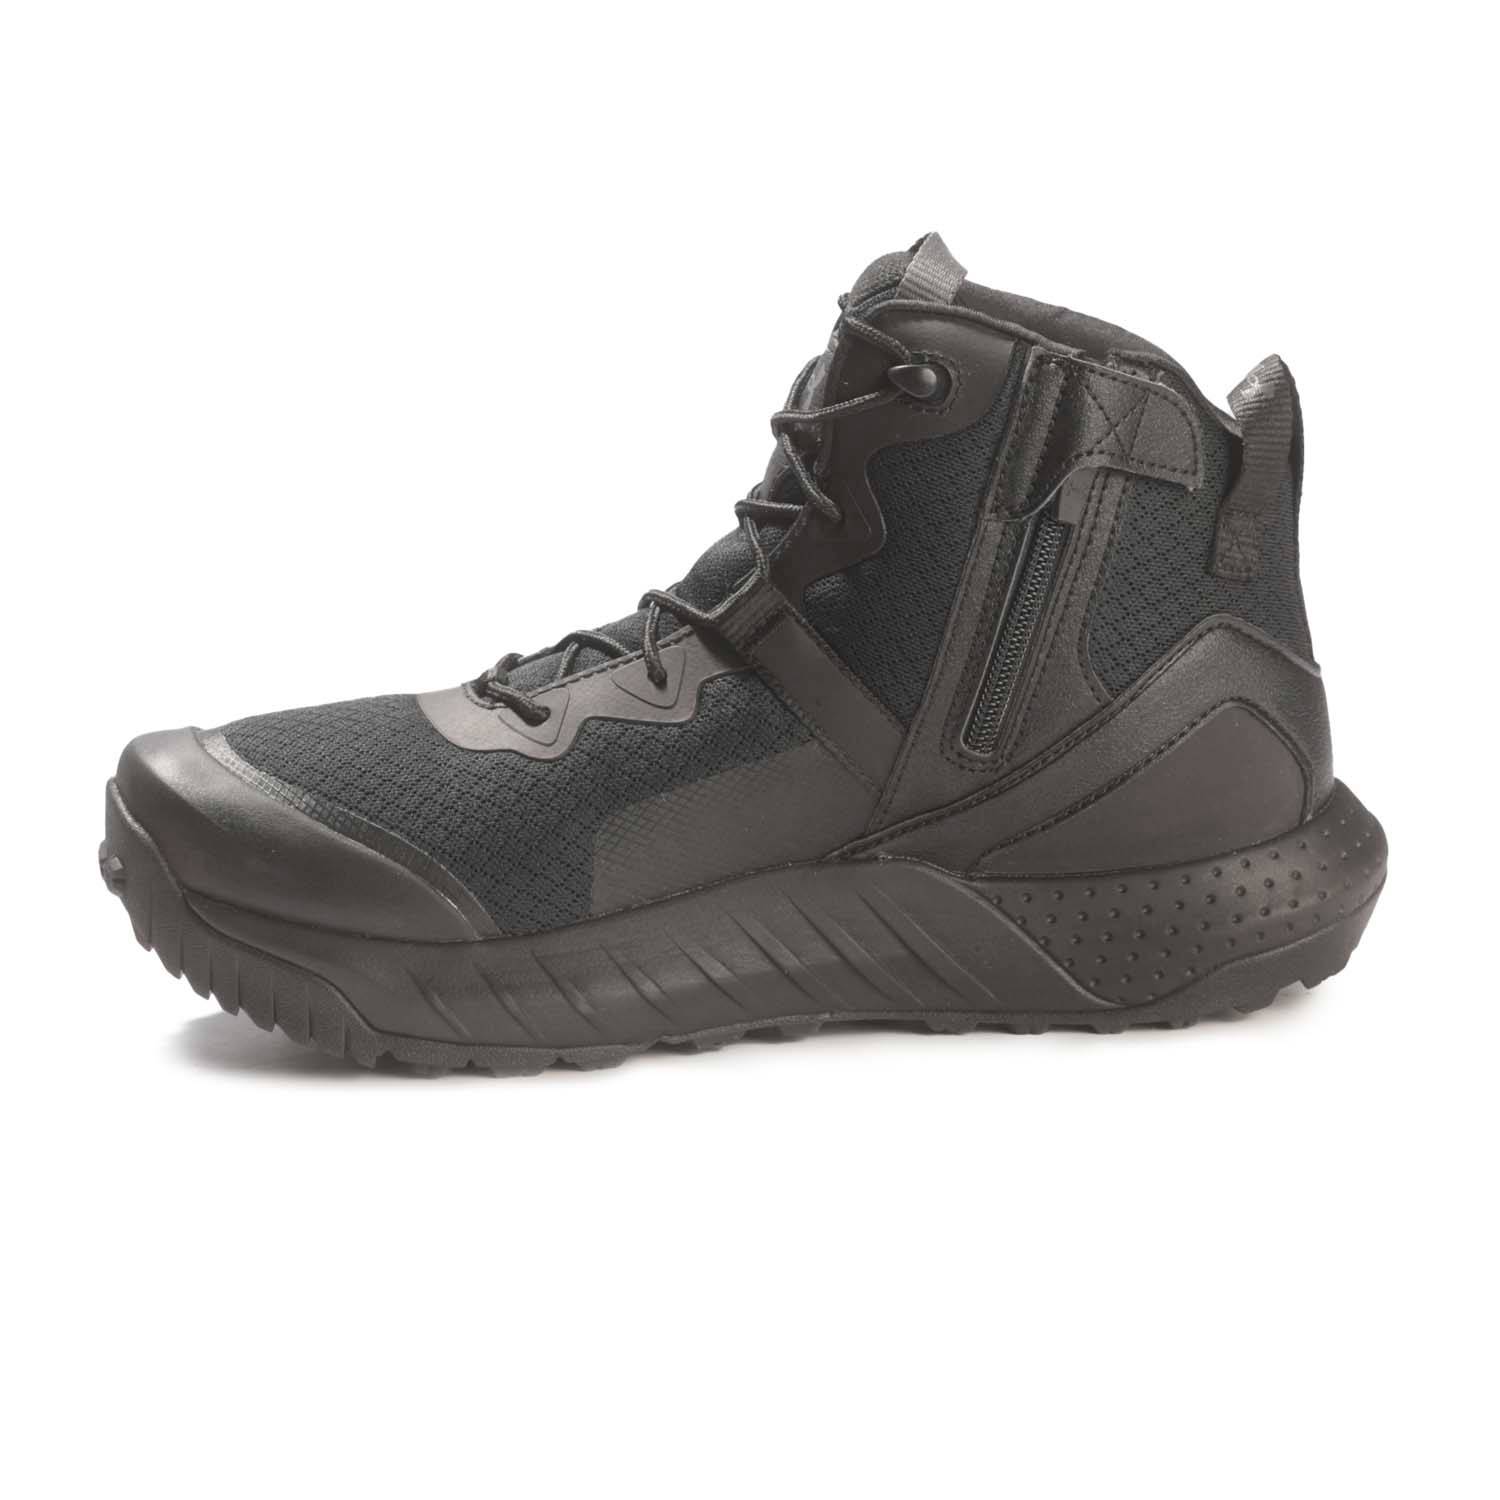 Under Armour Micro G Valsetz Mid Side Zip Review (Under Armour Tactical  Boots Review) 